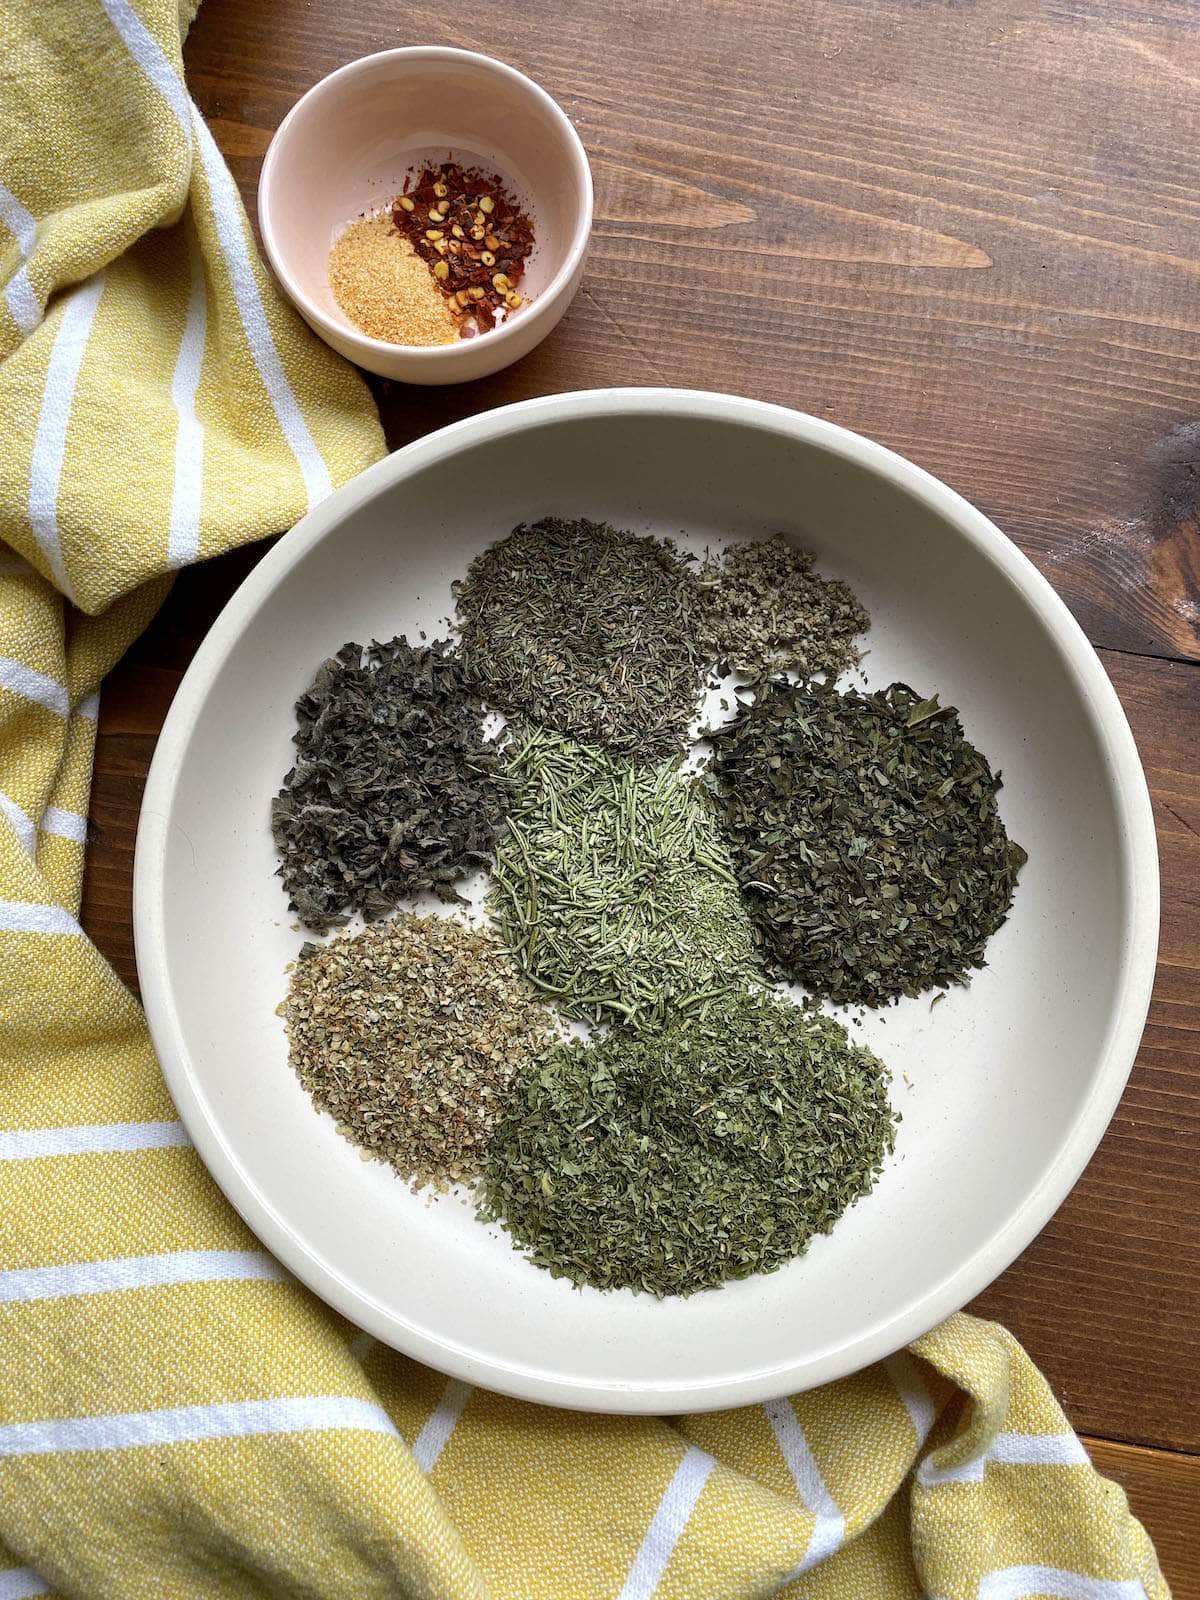 The ingredients in Italian seasoning in a large gray bowl, spread out in piles.